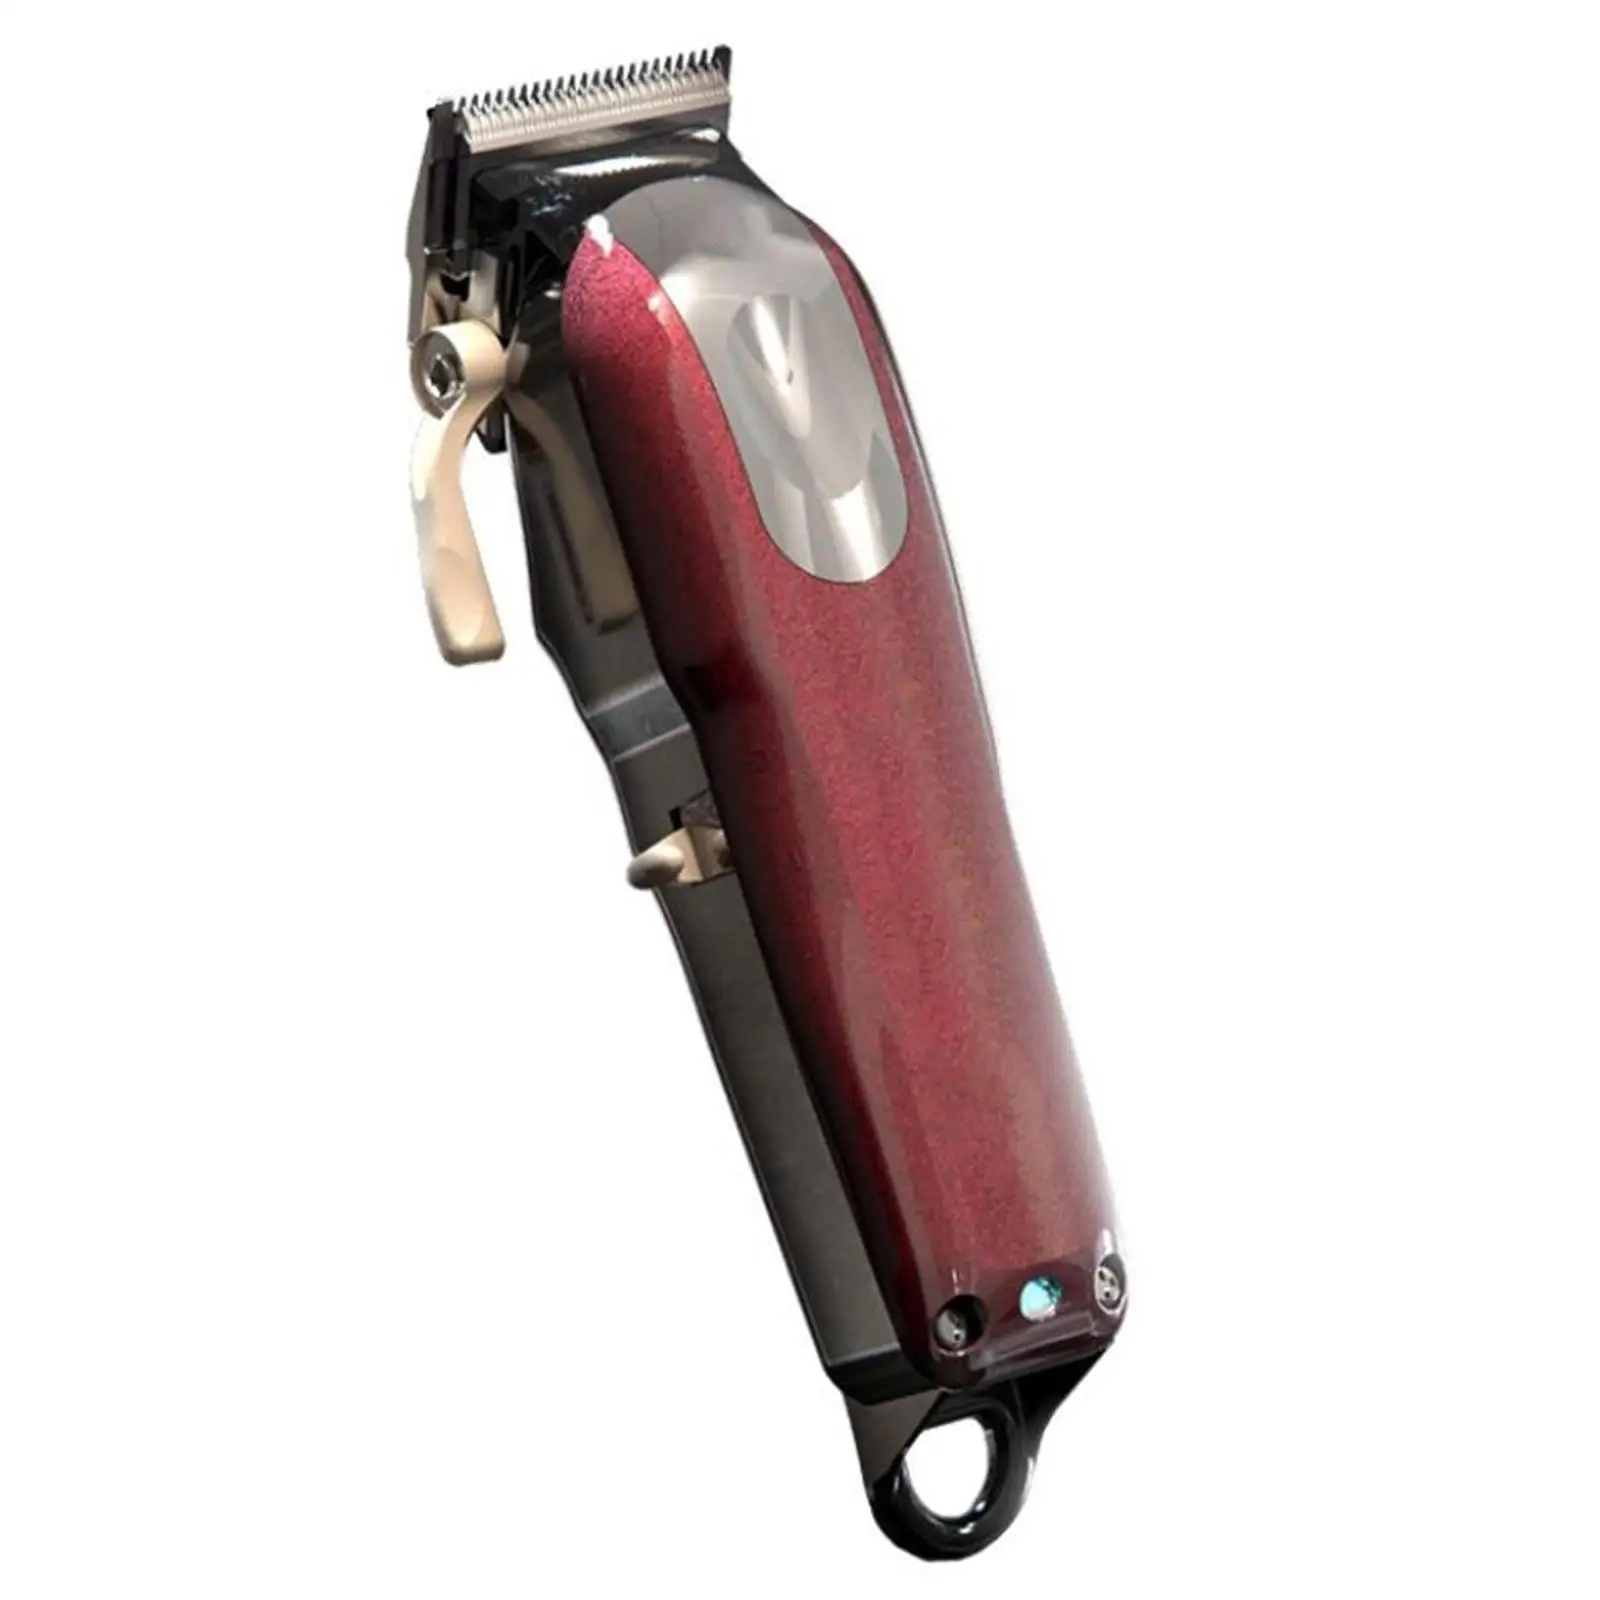 Electric Hair Clipper 8148 UK Power Adapter with Cutting Guides Versatile for Personal Use T Blade Cordless Use Professional